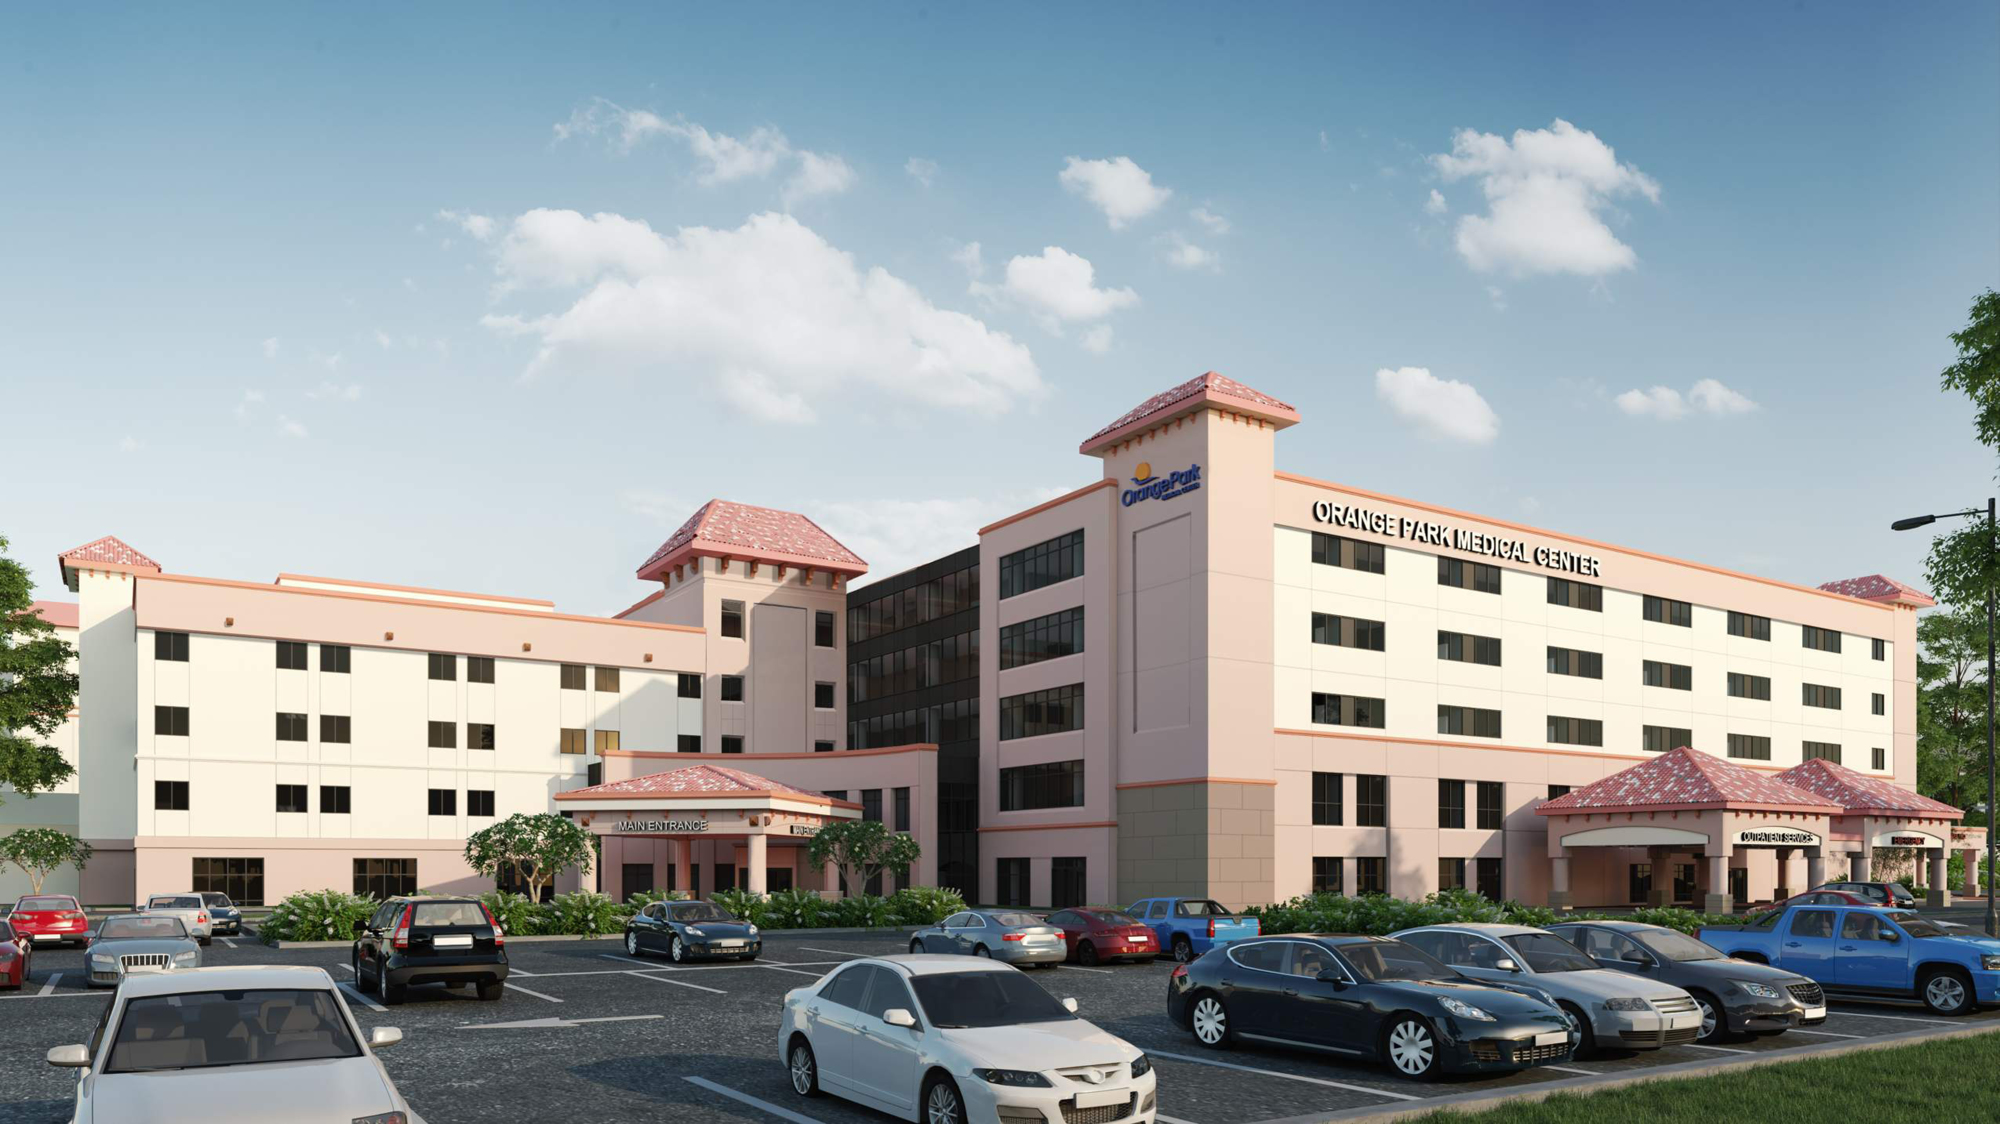 The addition will increase Orange Park Medical Center’s total of licensed beds to 365.